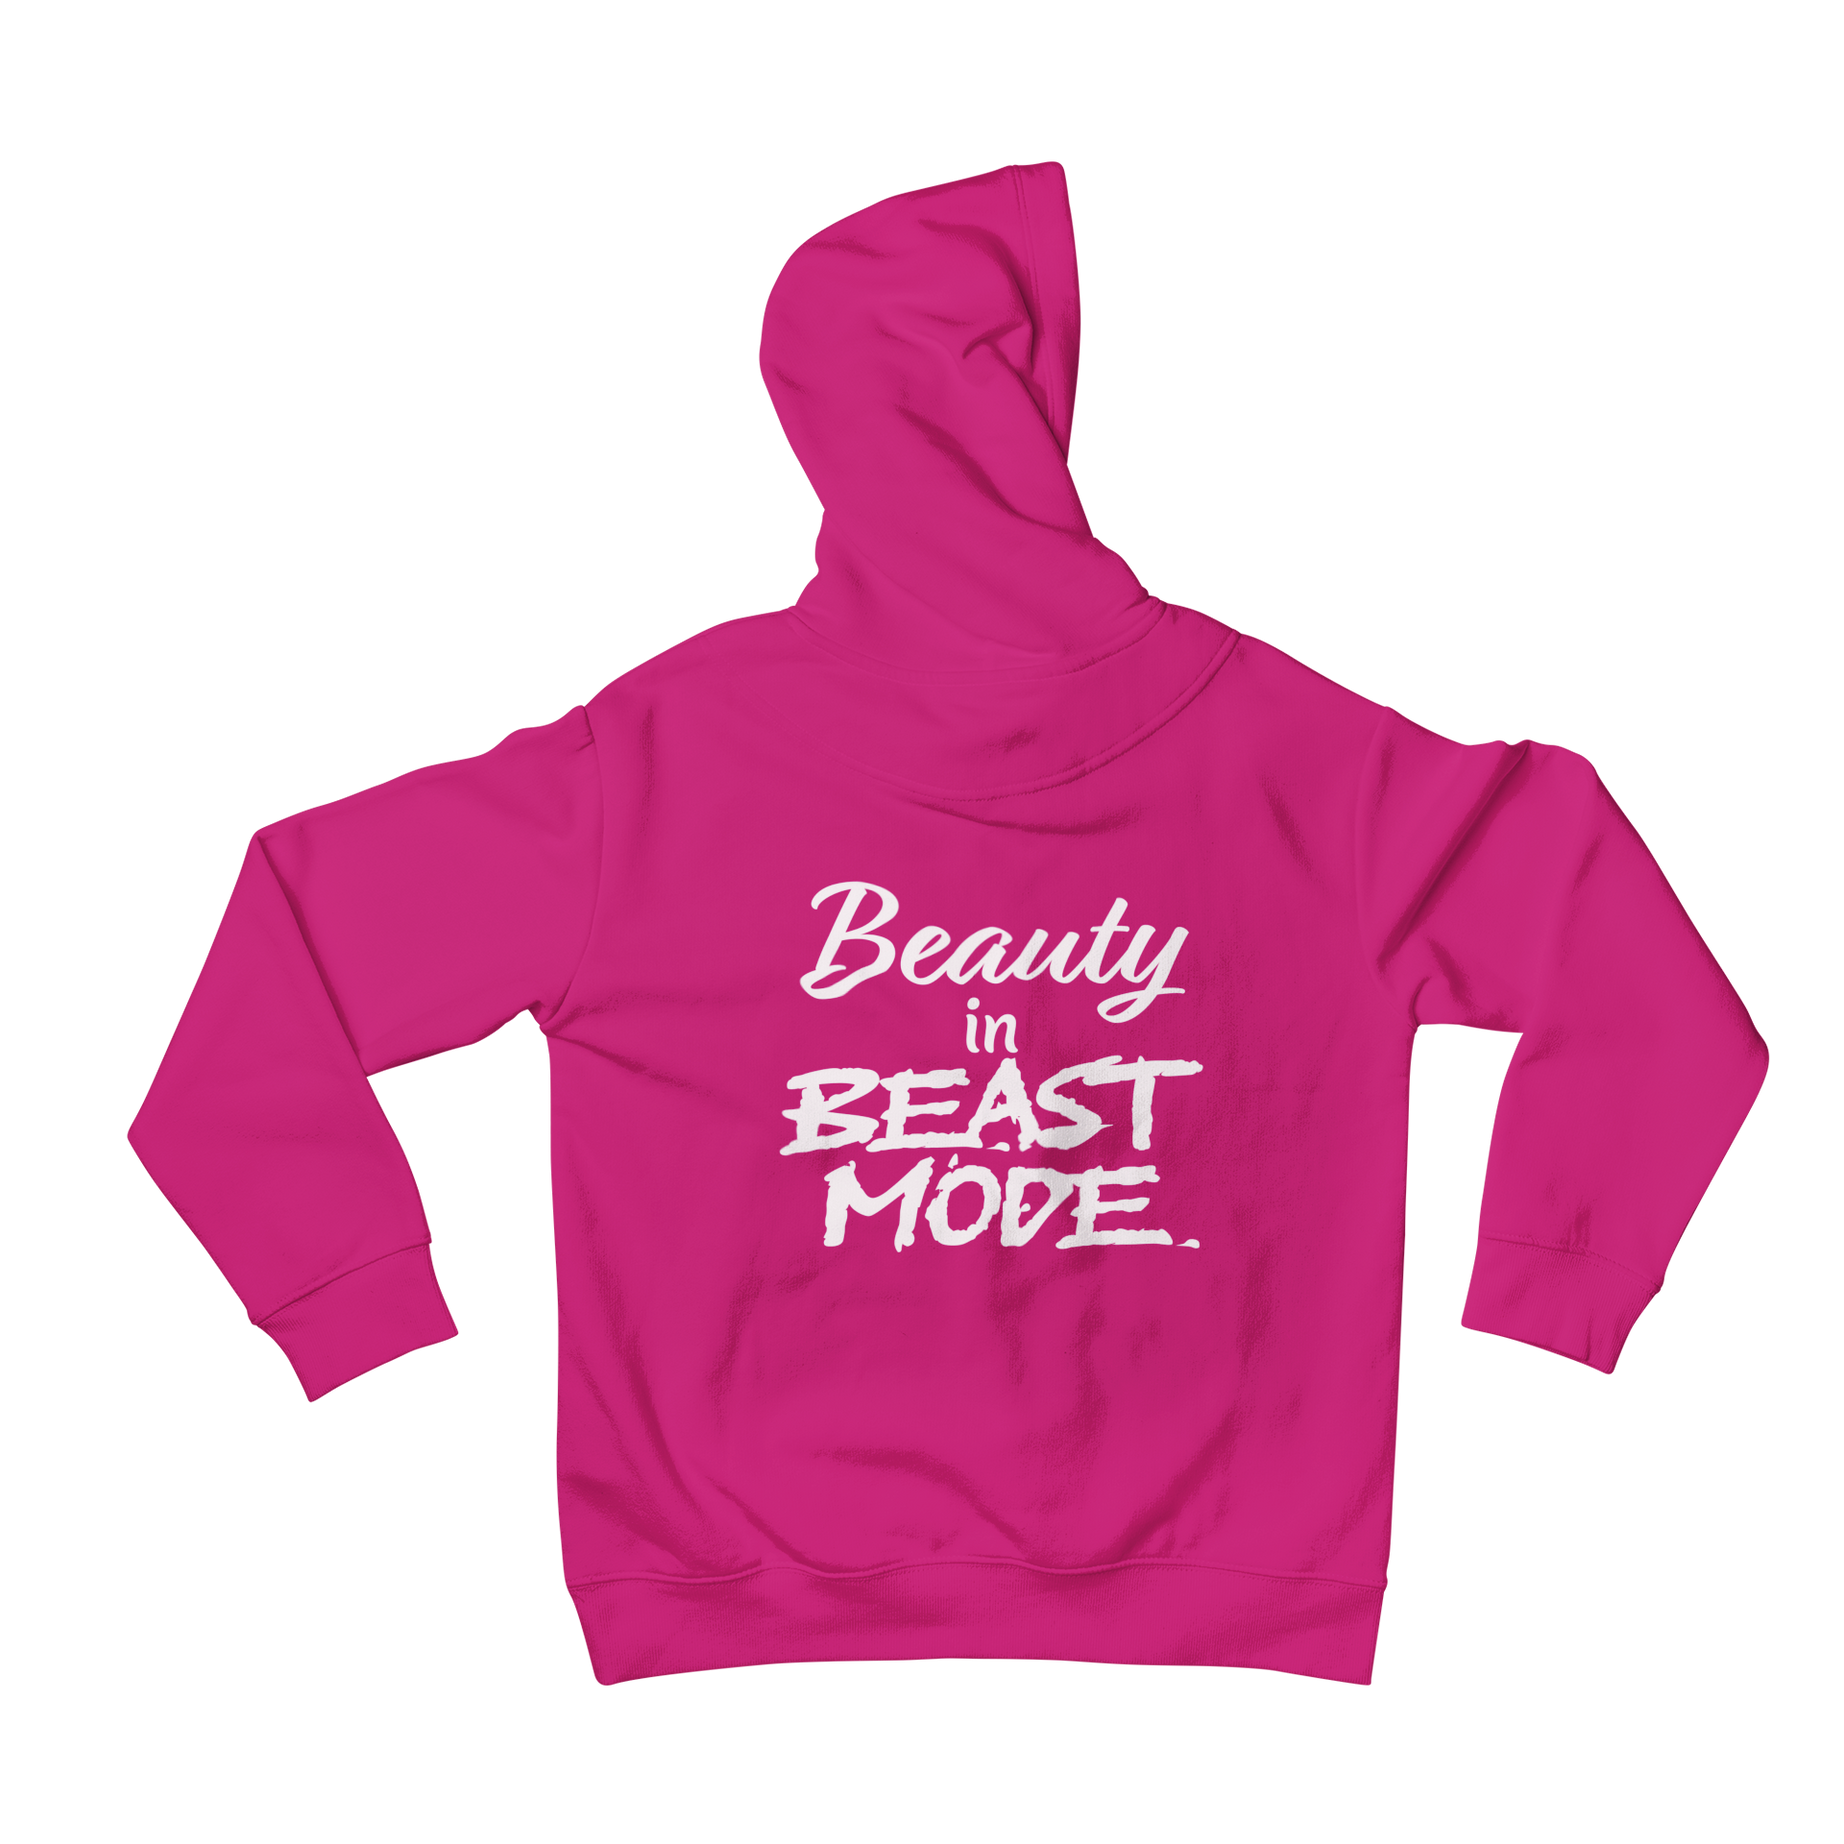 Unleash your inner beauty with our Beauty In Beast Back Print Hoodie! Featuring a bold back print slogan, this hoodie will take your beast mode to a whole new level. So why settle for basic when you can slay in style? Let your personality shine with this unique and playful addition to your wardrobe!